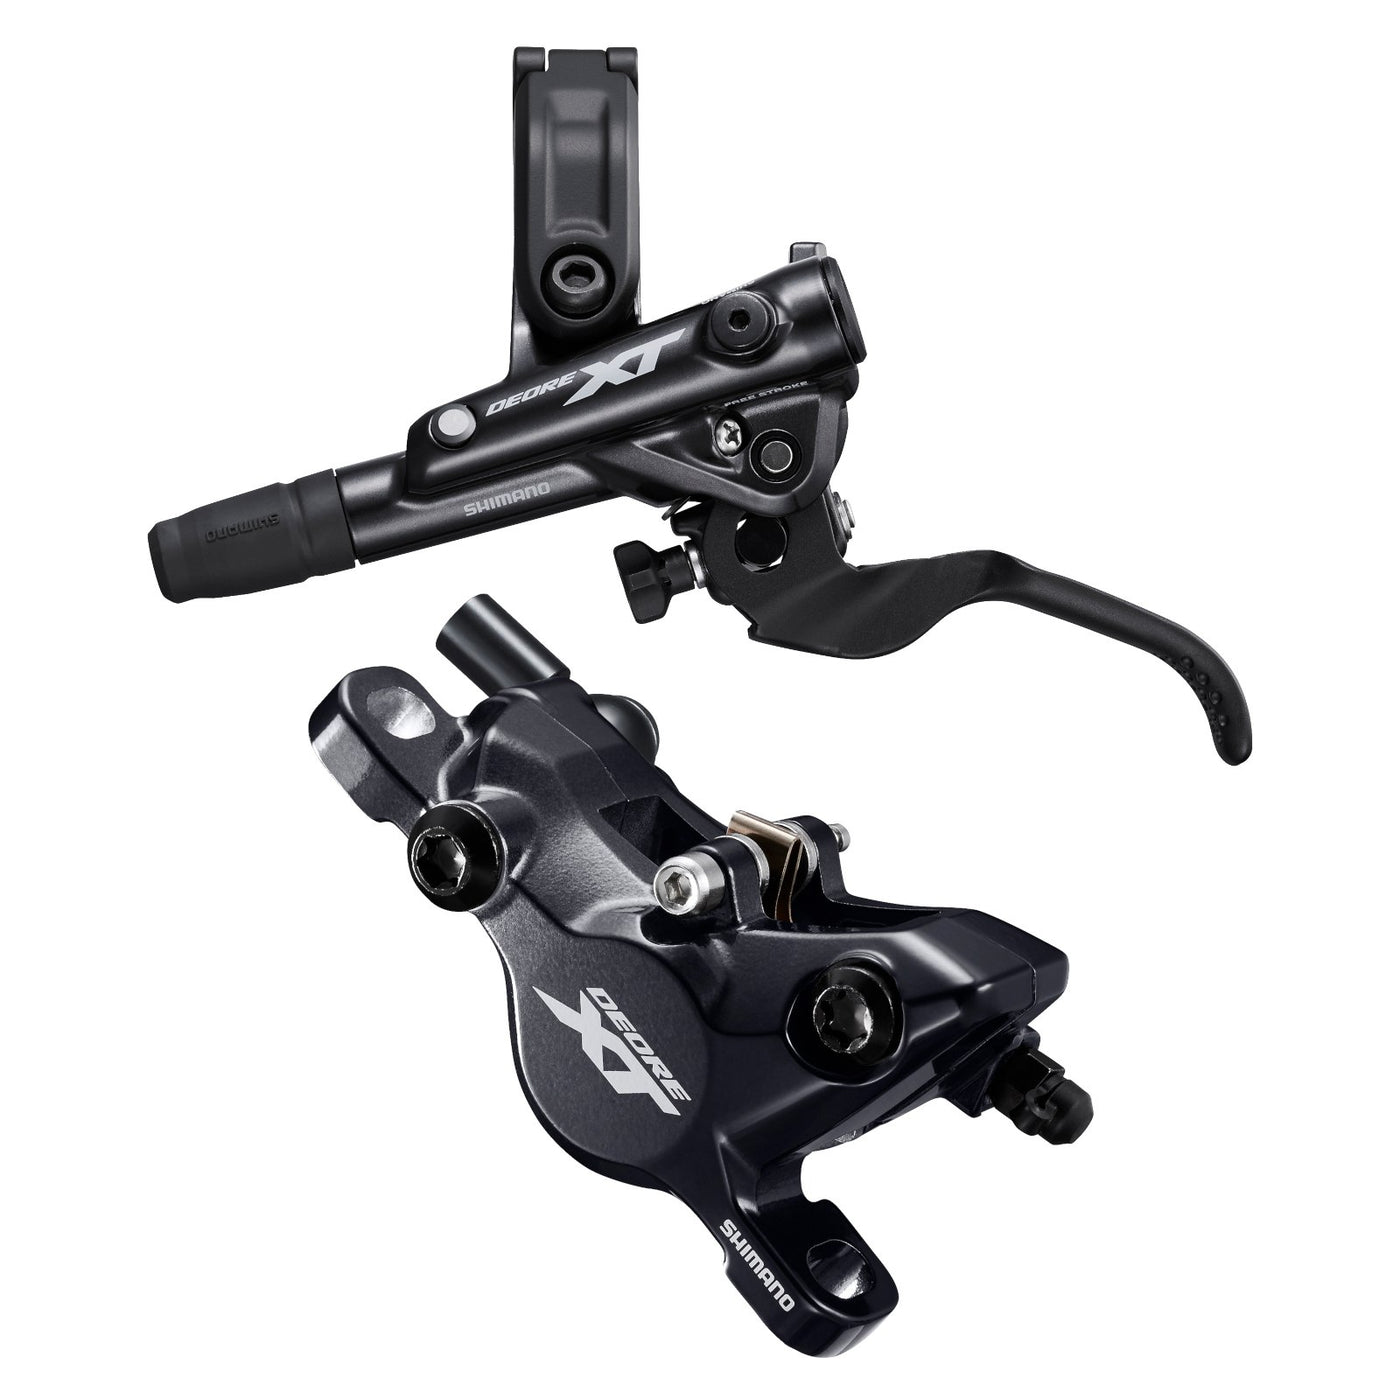 Shimano XT BL/BR-M8100 Hydraulic Disc Brake Set Levers Pair Front Rear